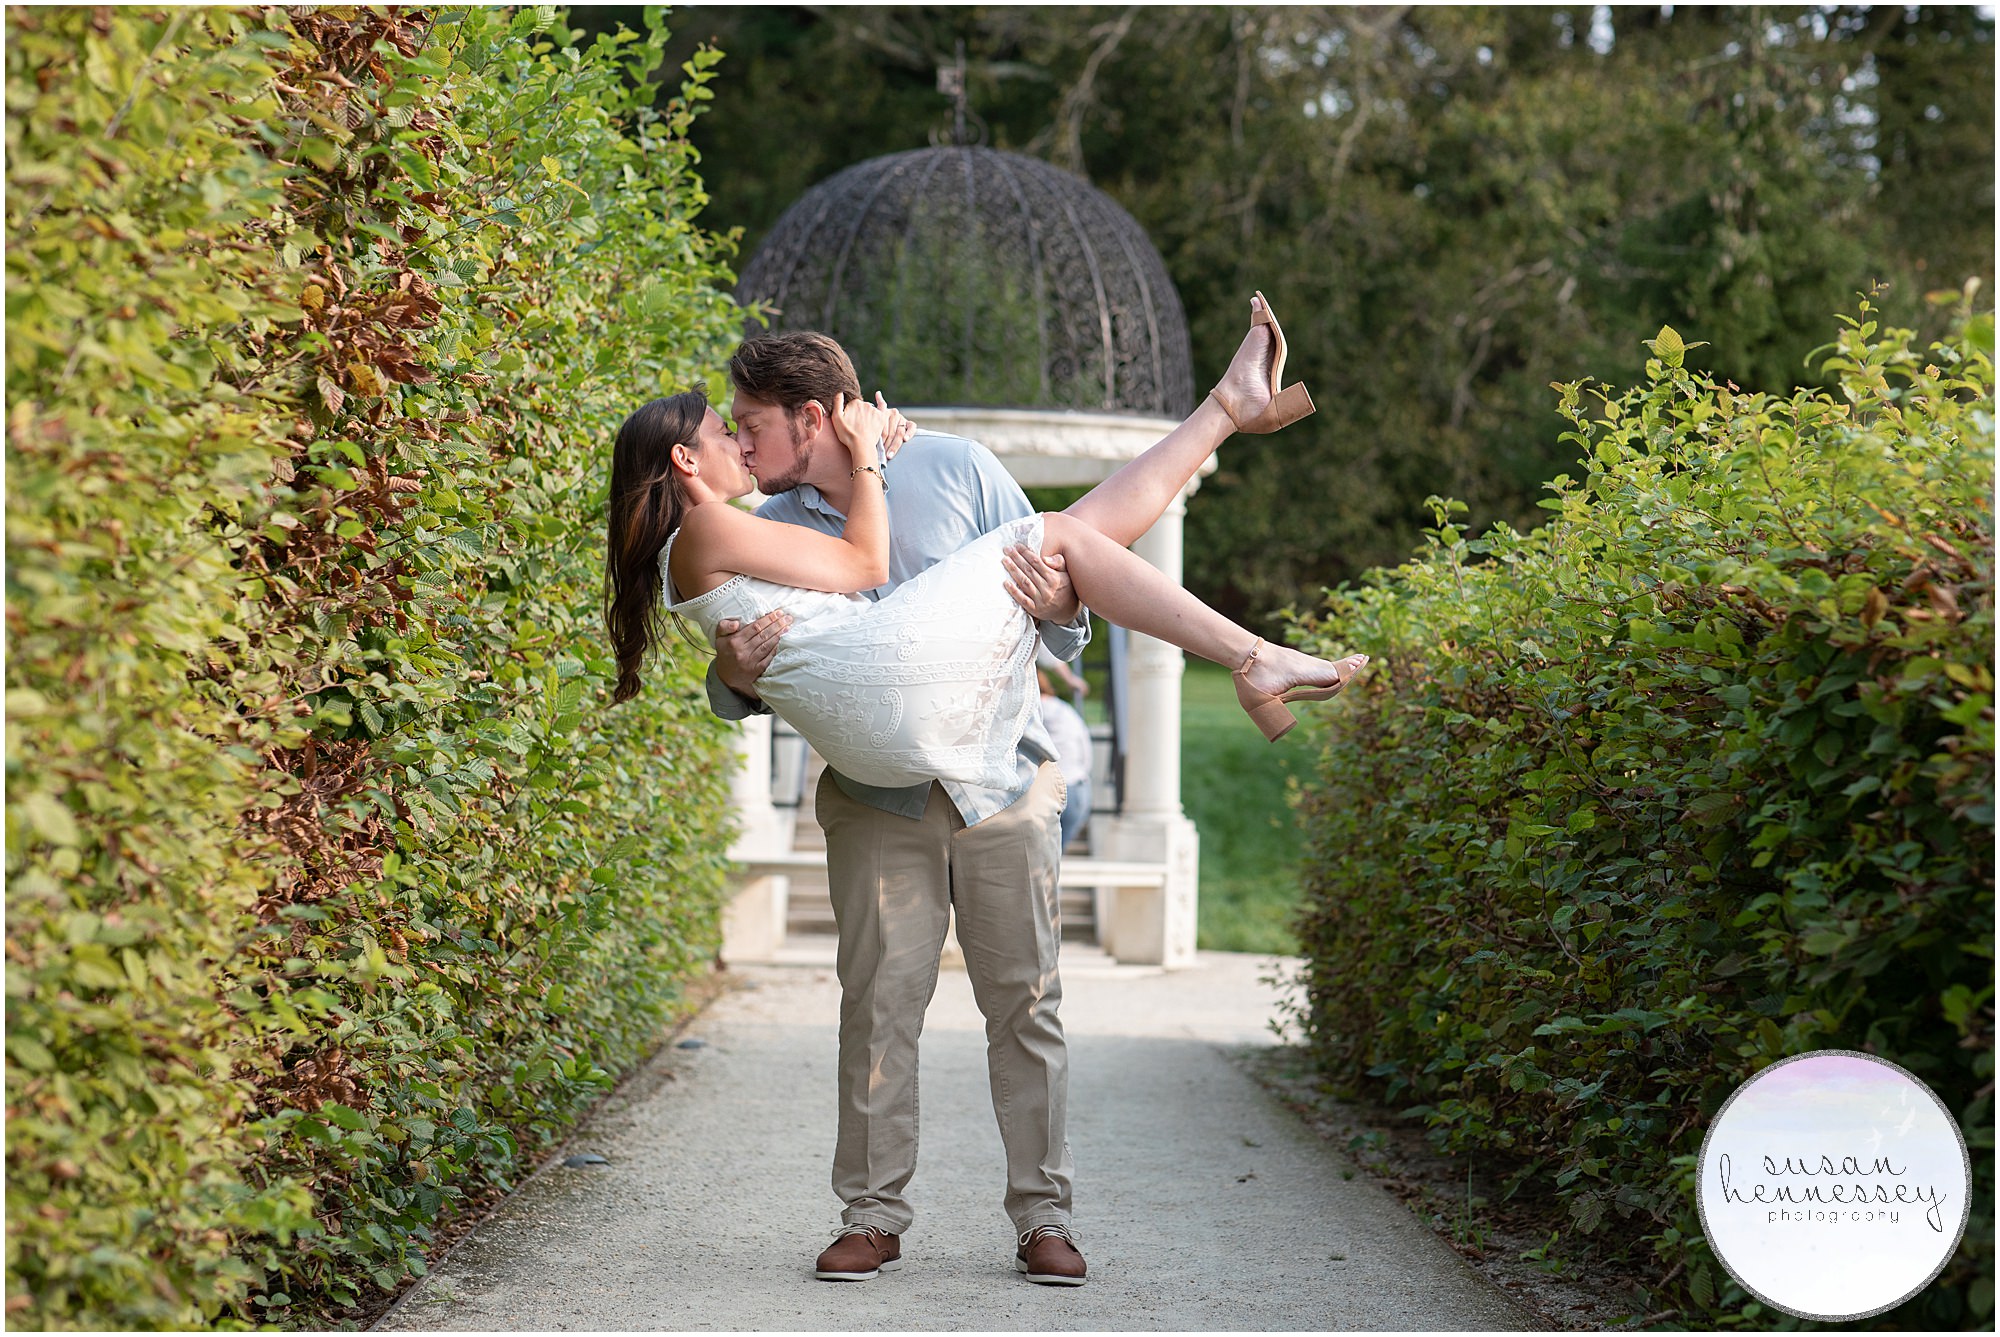 A photography Session at Longwood Gardens of an engaged couple